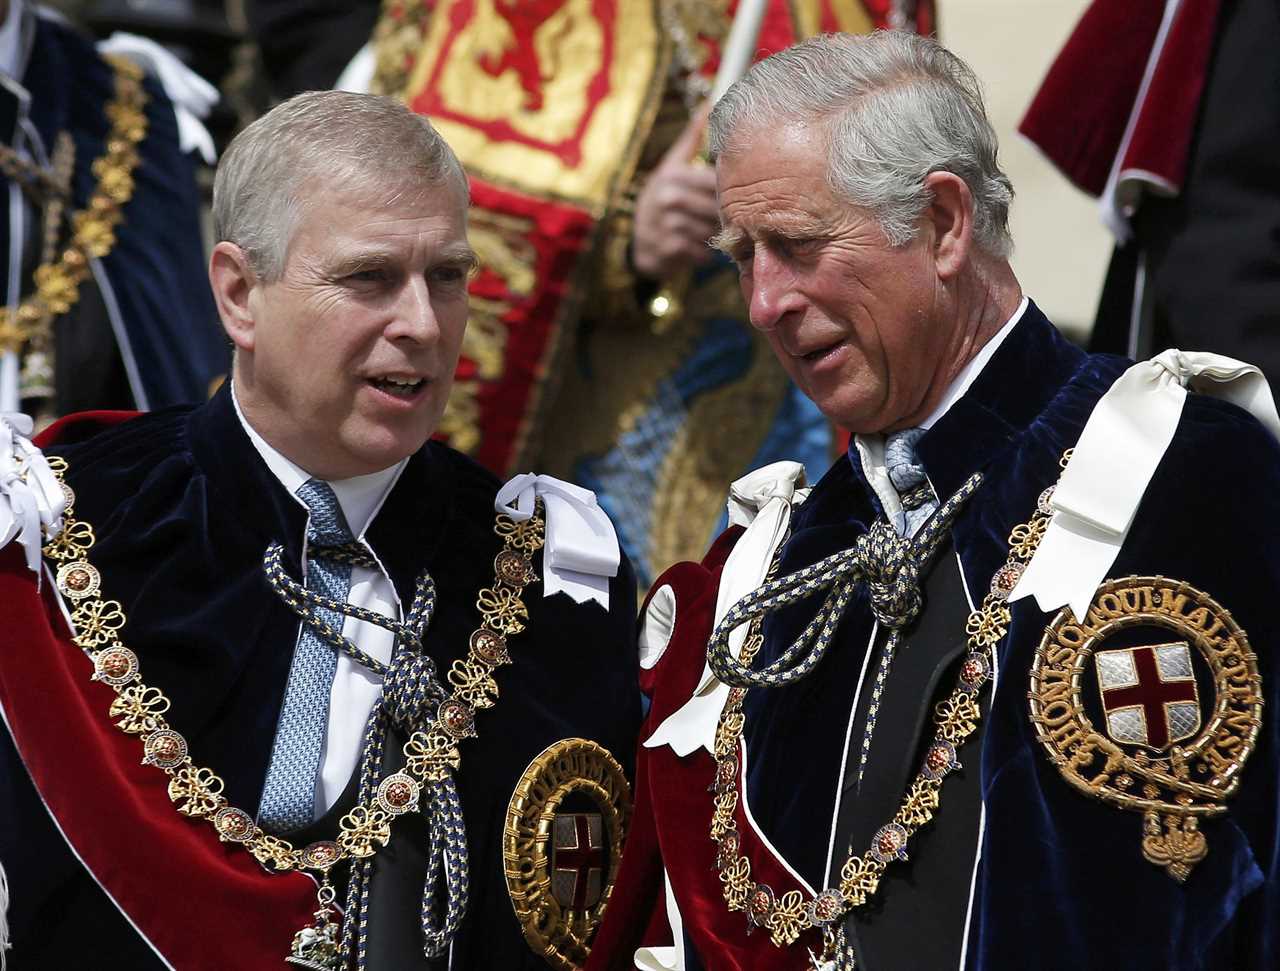 Prince Andrew ‘broke down in tears after Charles told him he’d never return to royal duties in intense private meeting’